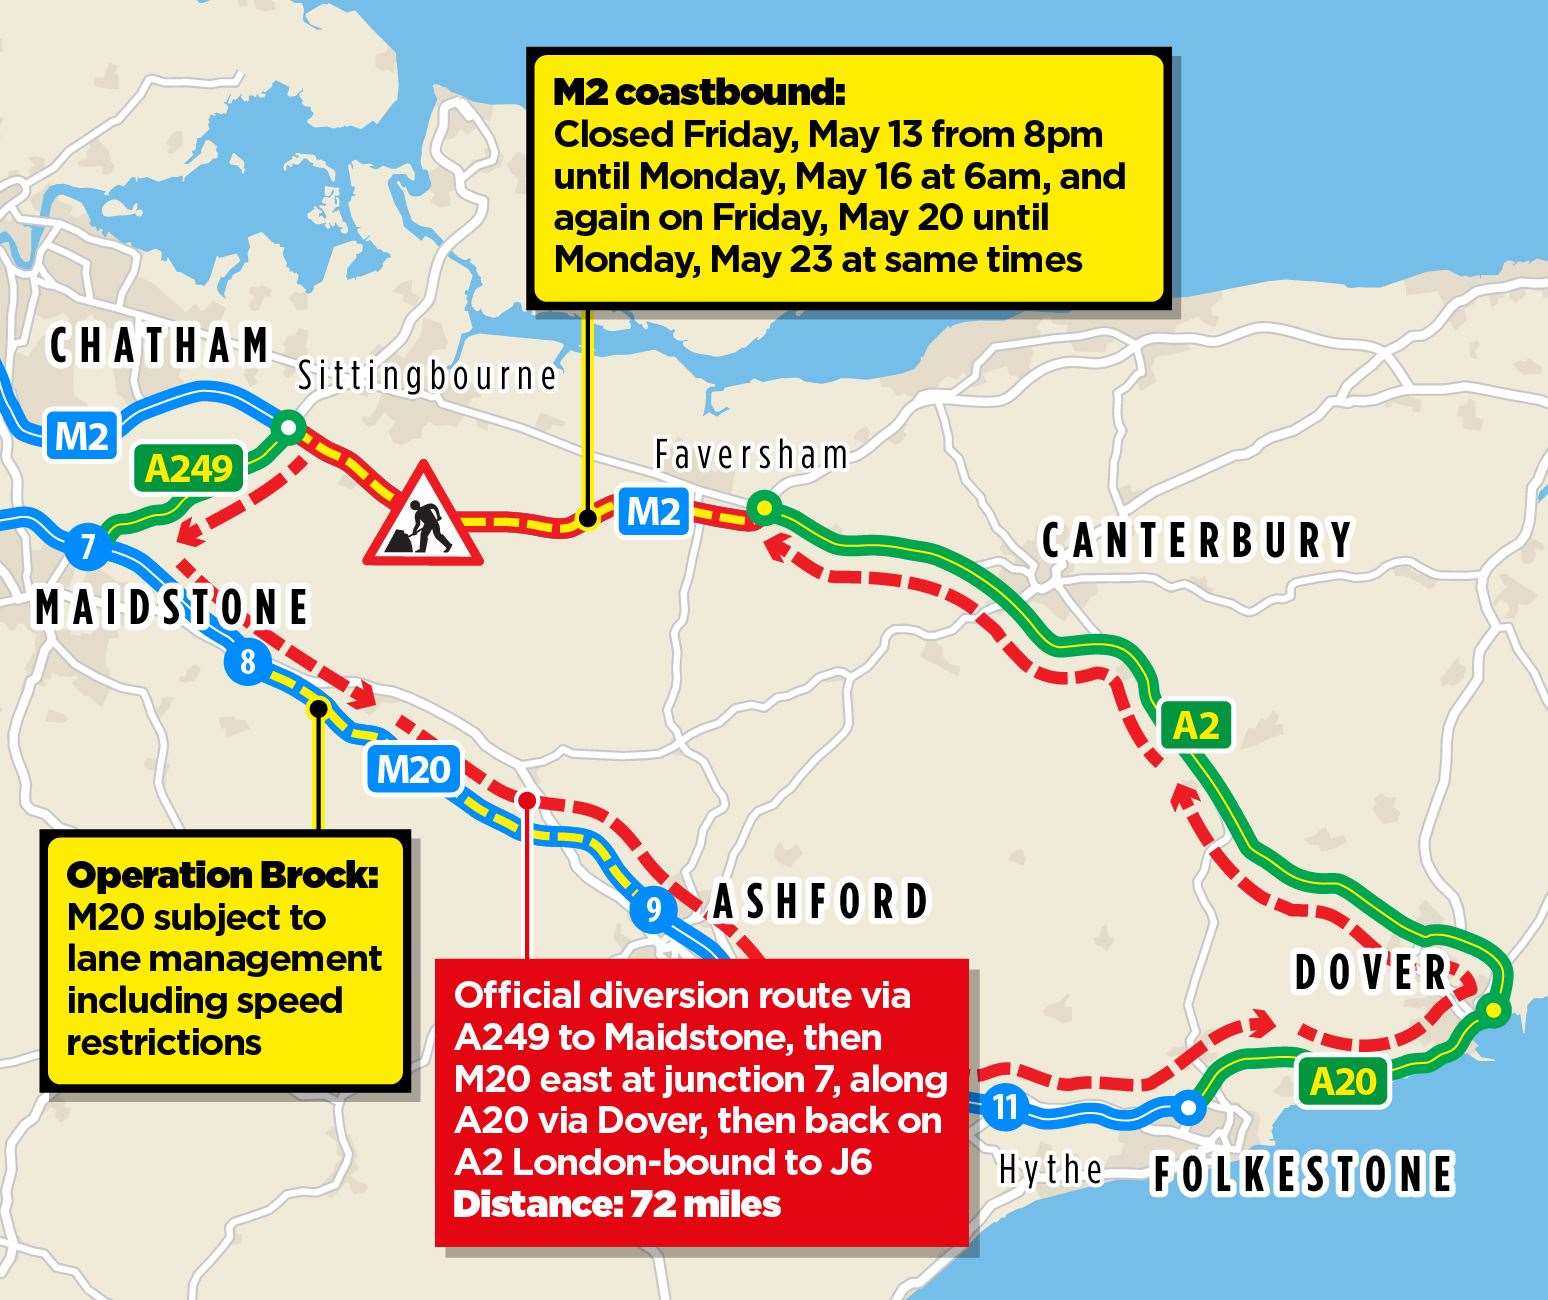 The huge diversion route for this, and next, weekend